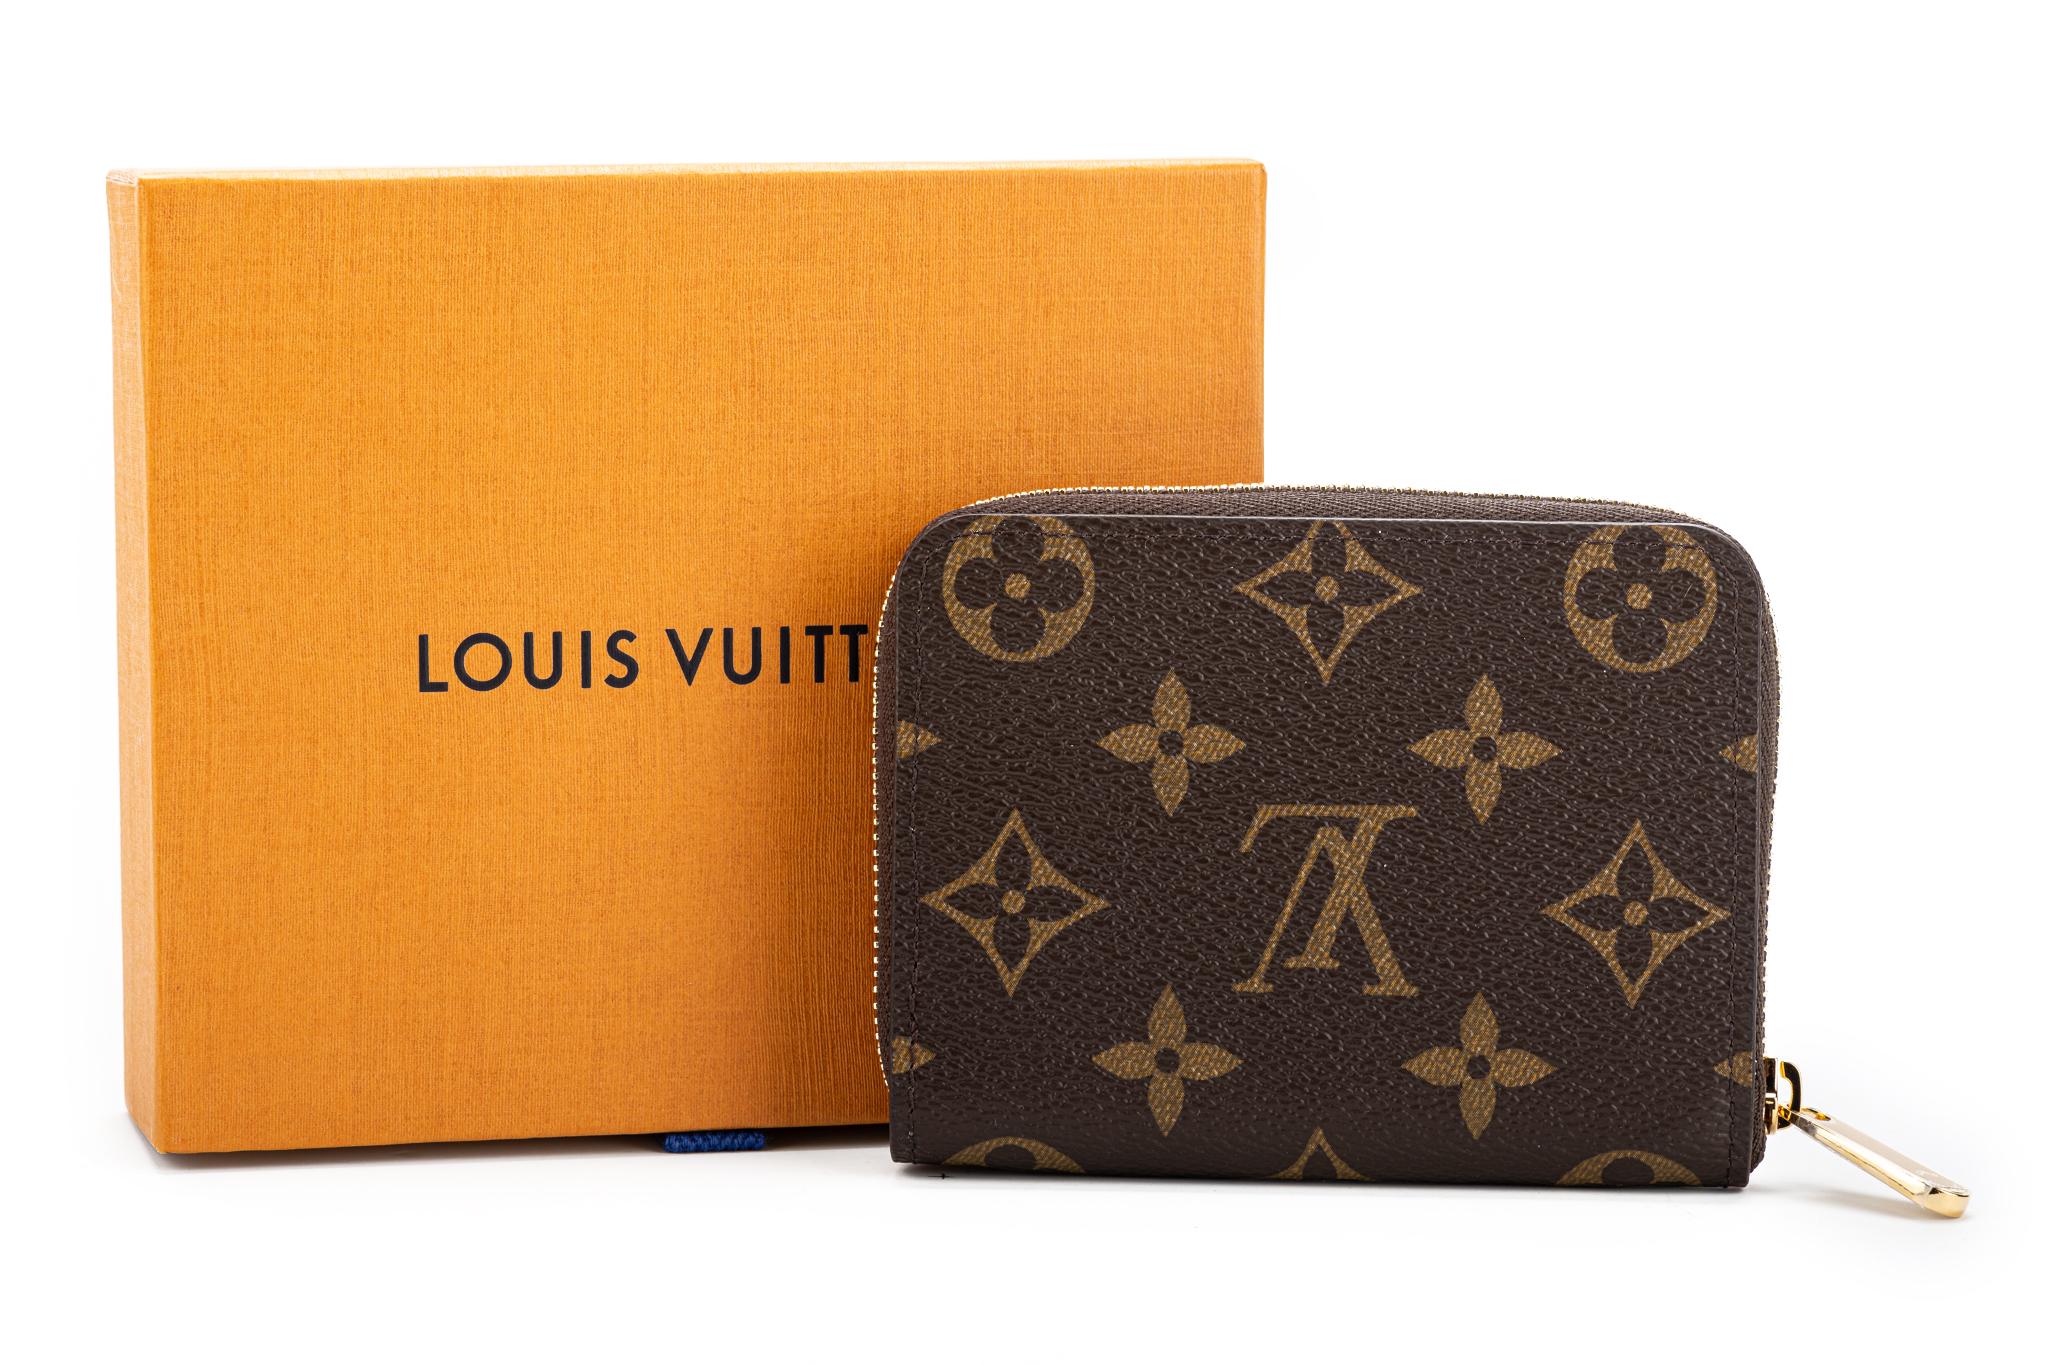 For Christmas 2020, Louis Vuitton's Vivienne mascot stars on an exclusive edition of the Zippy coin purse in Monogram canvas at the Luna Park. Brand new in box with original dust cover.